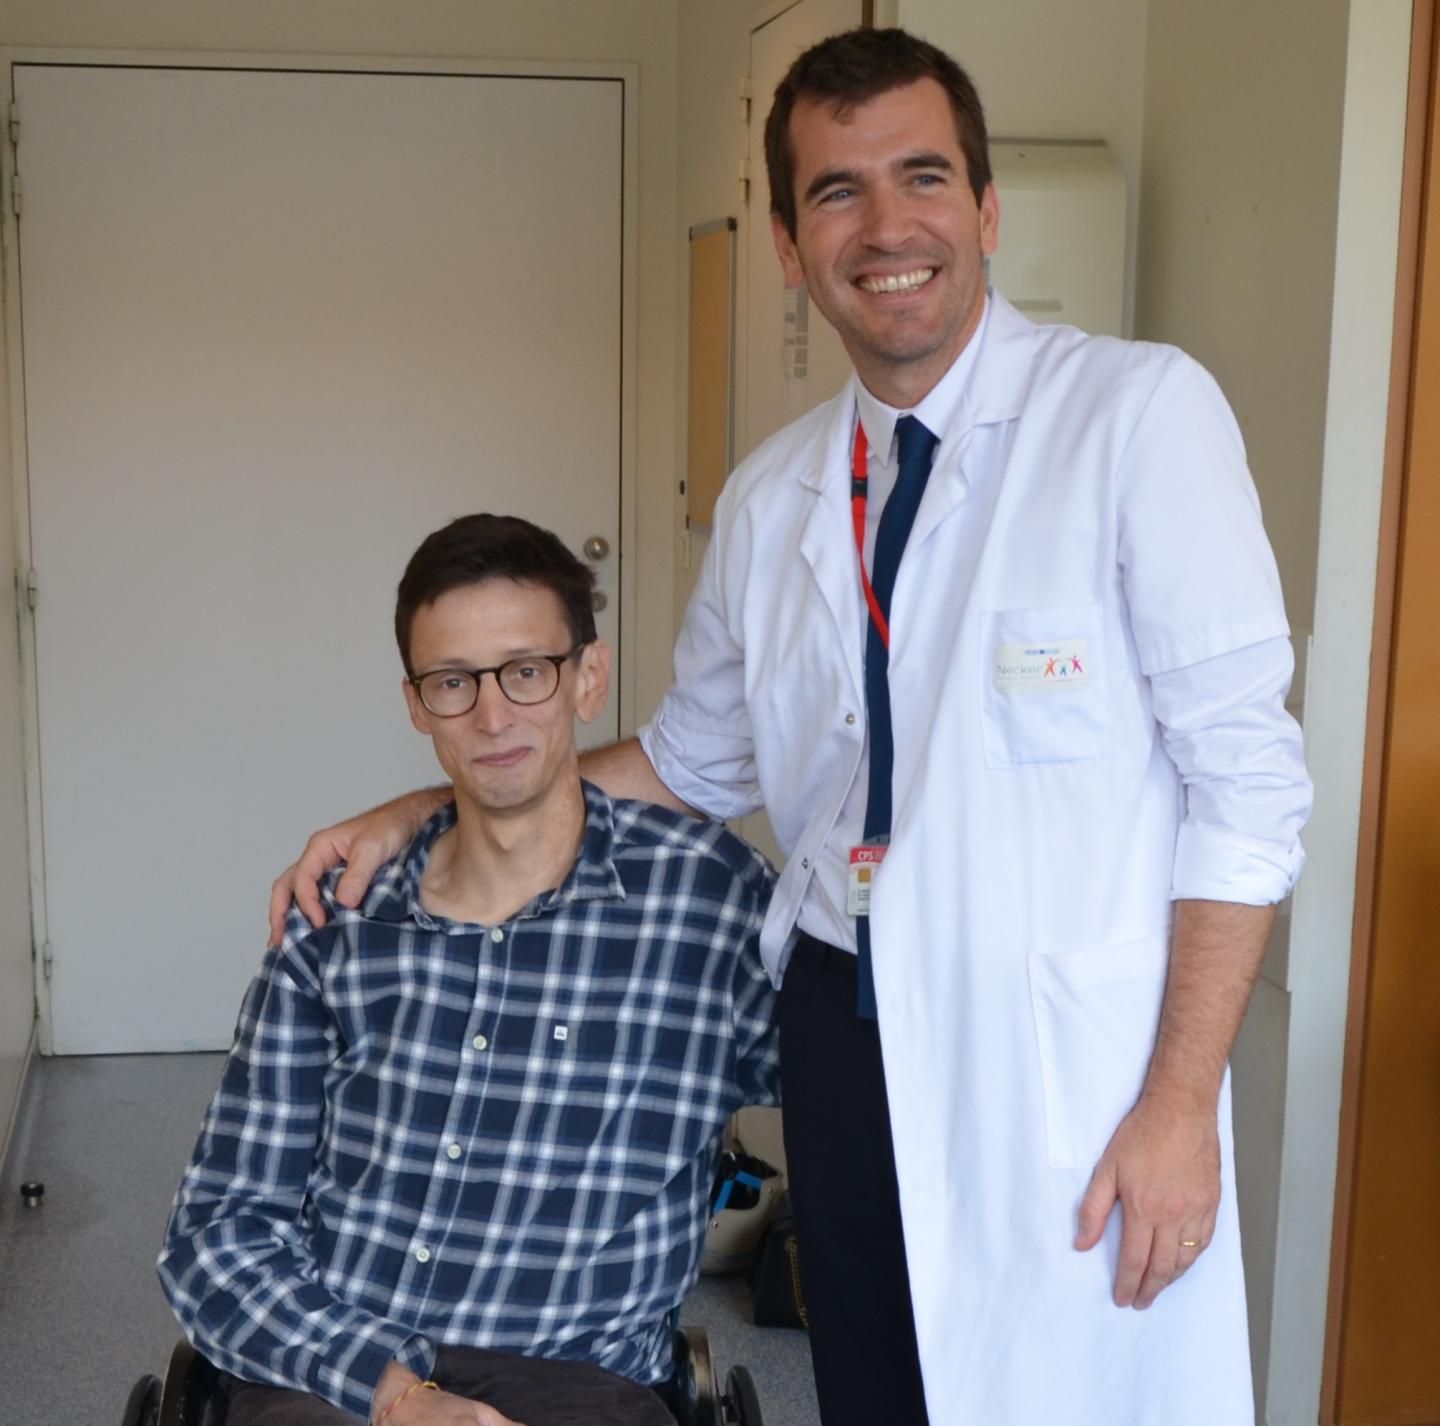 Dr. Canaud and Patient 1, INSERM